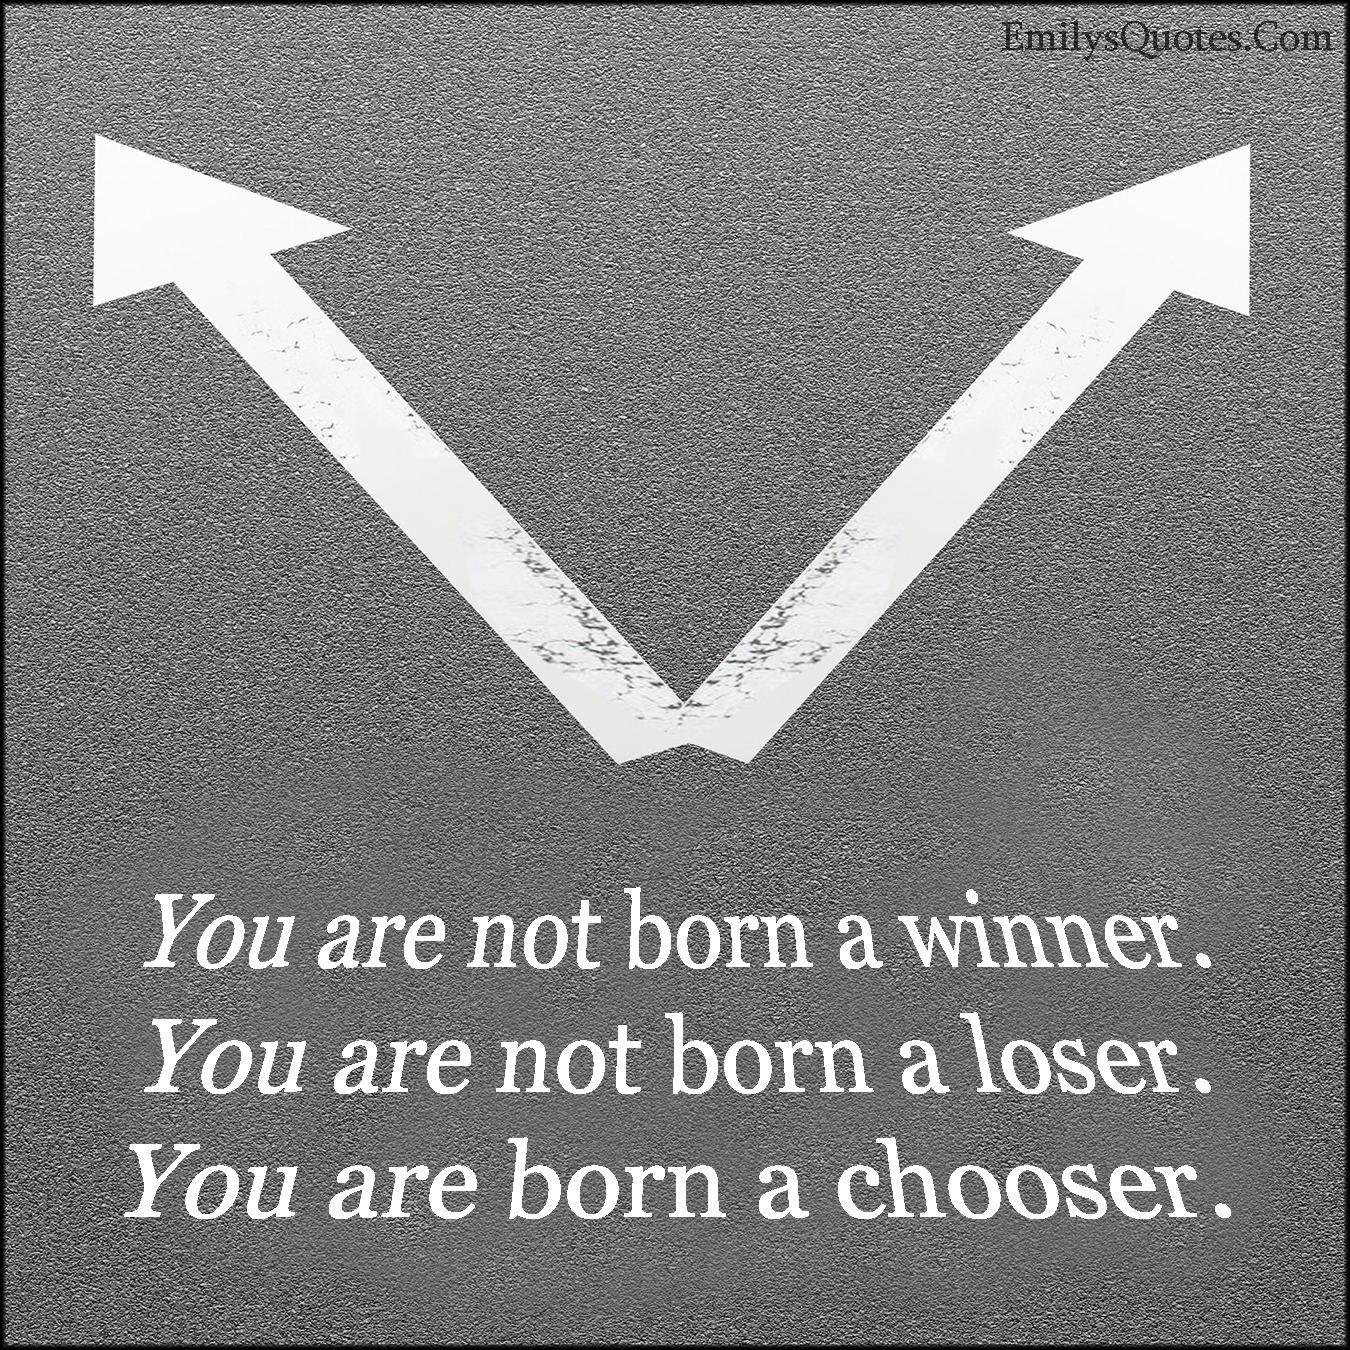 You are not born a winner. You are not born a loser. You are born a chooser